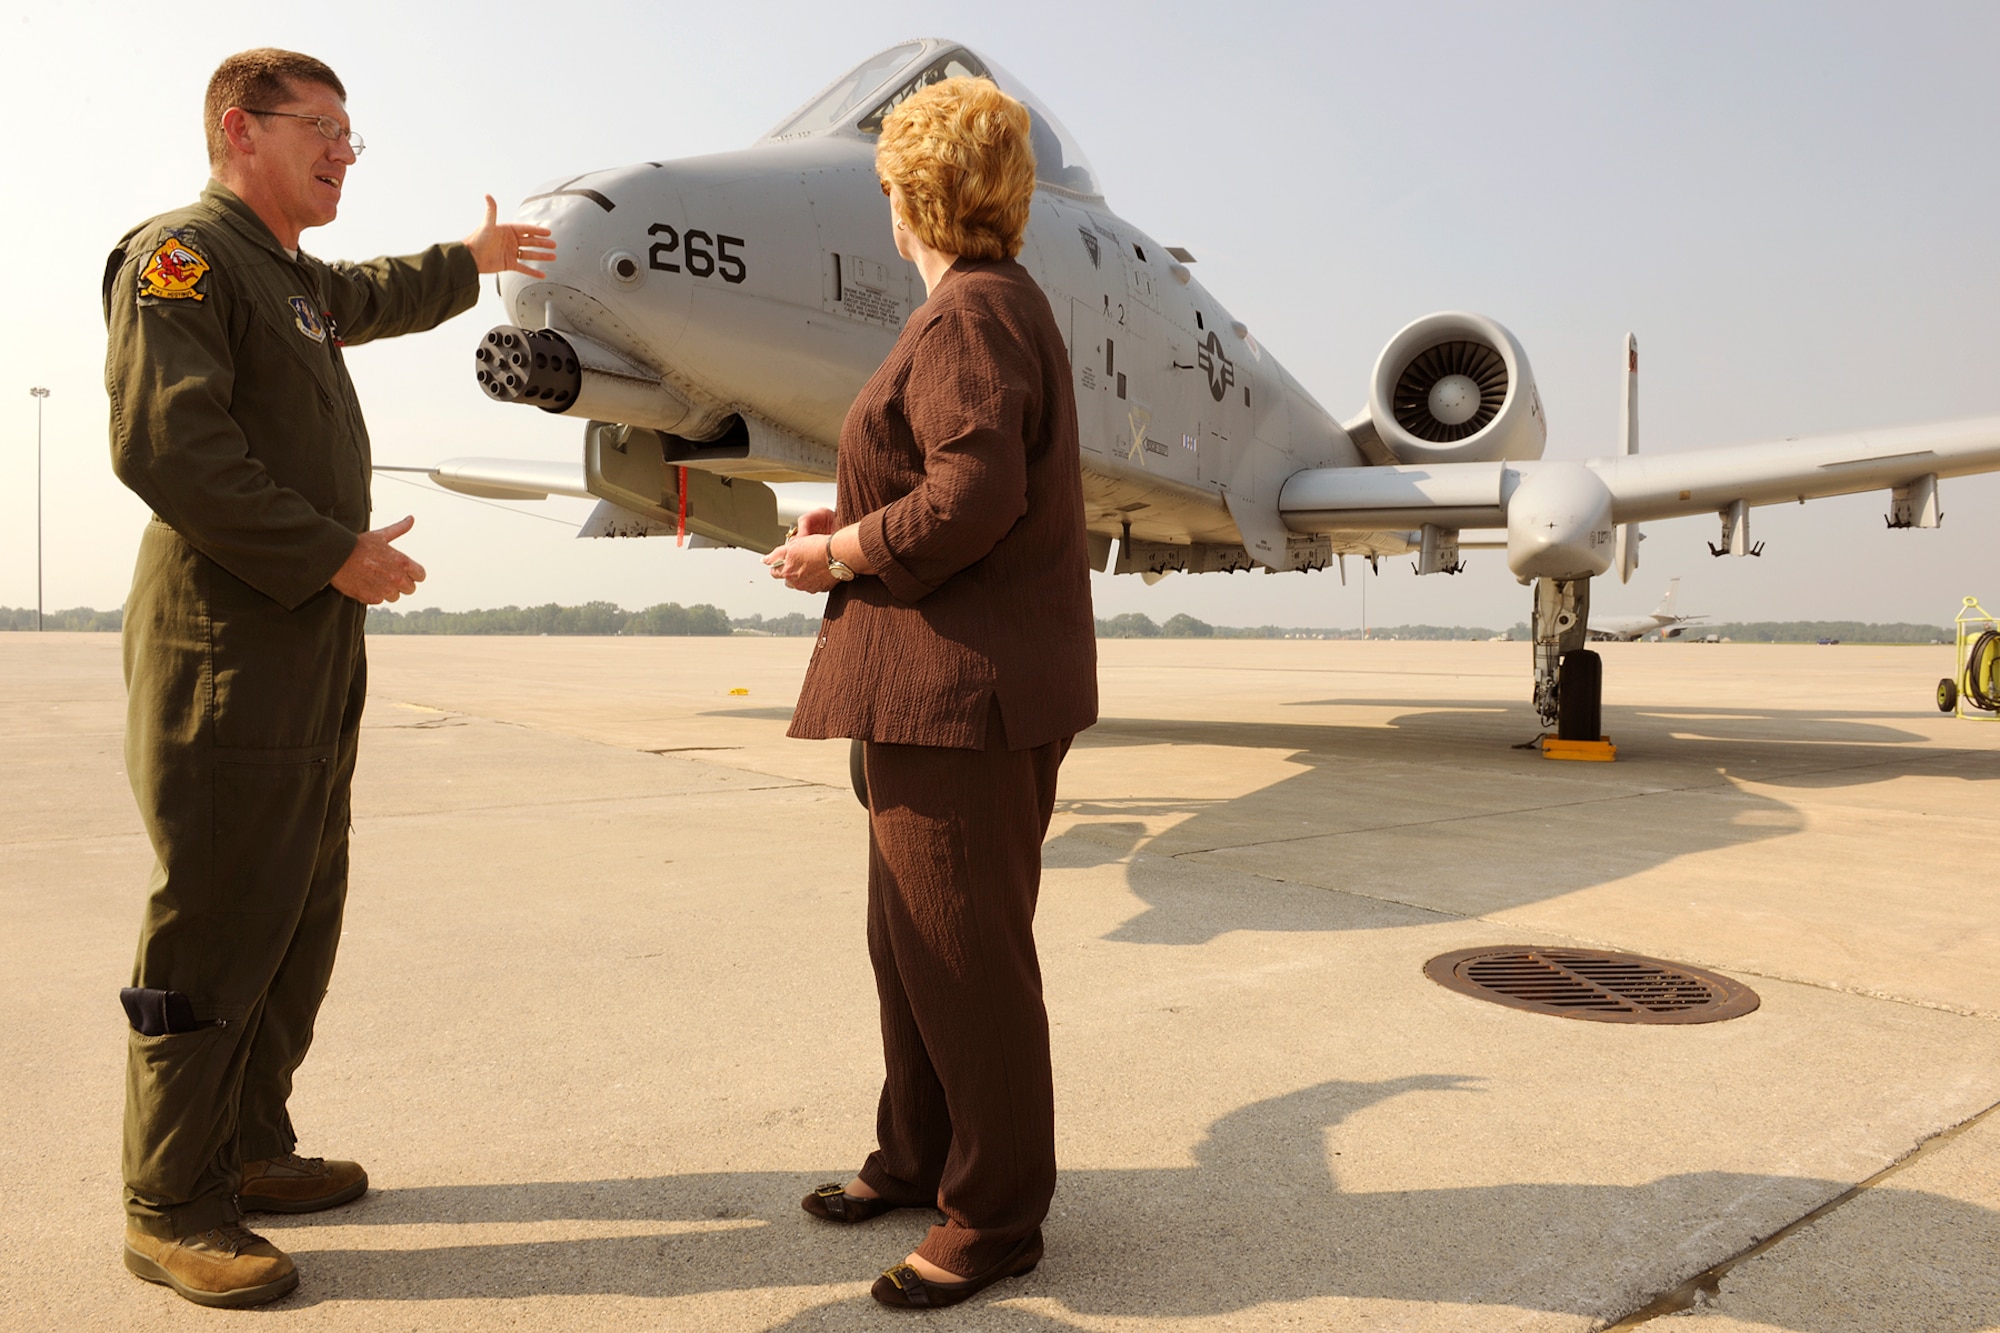 150902-Z-EZ686-085 -- Col. Douglas Champagne, commander of the 127th Operations Group and an A-10 Thunderbolt II pilot, explains the capabilities of the aircraft to U.S. Sen. Debbie Stabenow, D-Mich., during a visit by a Congressional delegation to Selfridge Air National Guard Base, Mich., Sept. 2, 2015. Selfridge was the first stop on a two-day tour of all of Michigan major military installations. Seven Michigan members of Congress and many of their staff aides participated in the trip. (U.S. Air National Guard photos by Master Sgt. David Kujawa / Released)